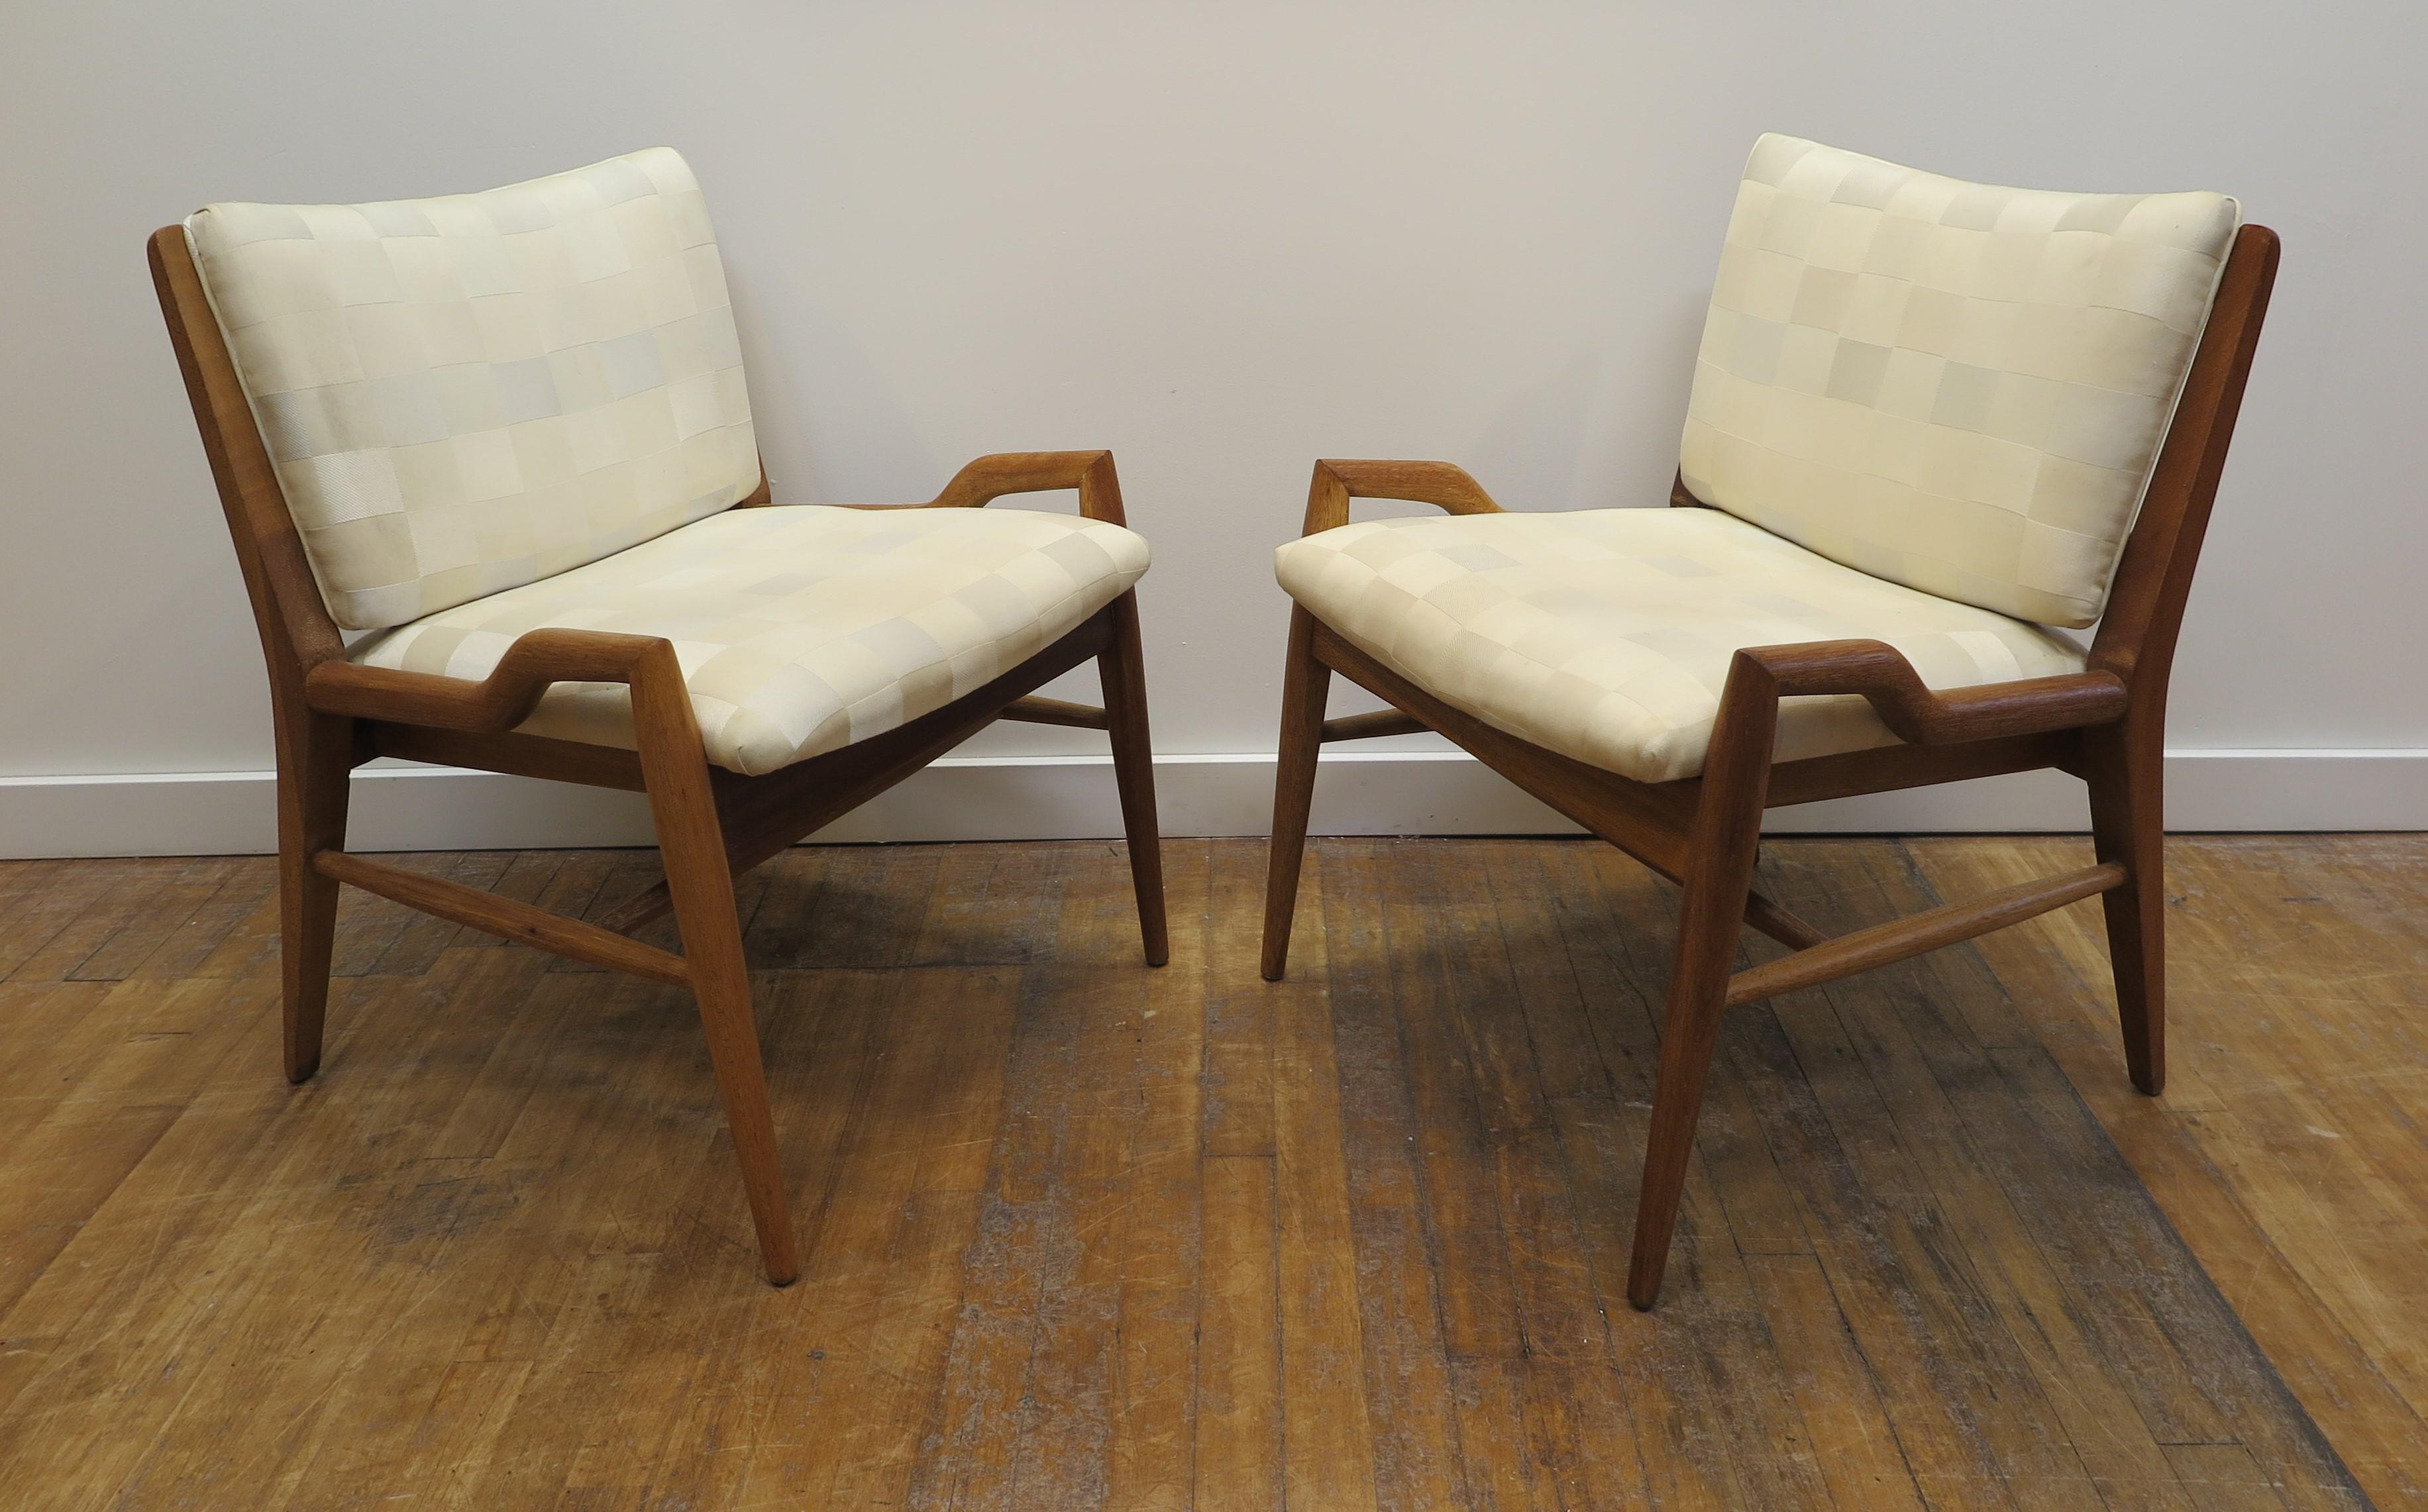 John Keal low arm chairs. John Keal low arm chairs in Mahogany. One of John Keal's most coveted and sought after designs are these low arm chairs. Many times used in dining chair sets as head chairs, also sold and used as occasional chairs, side